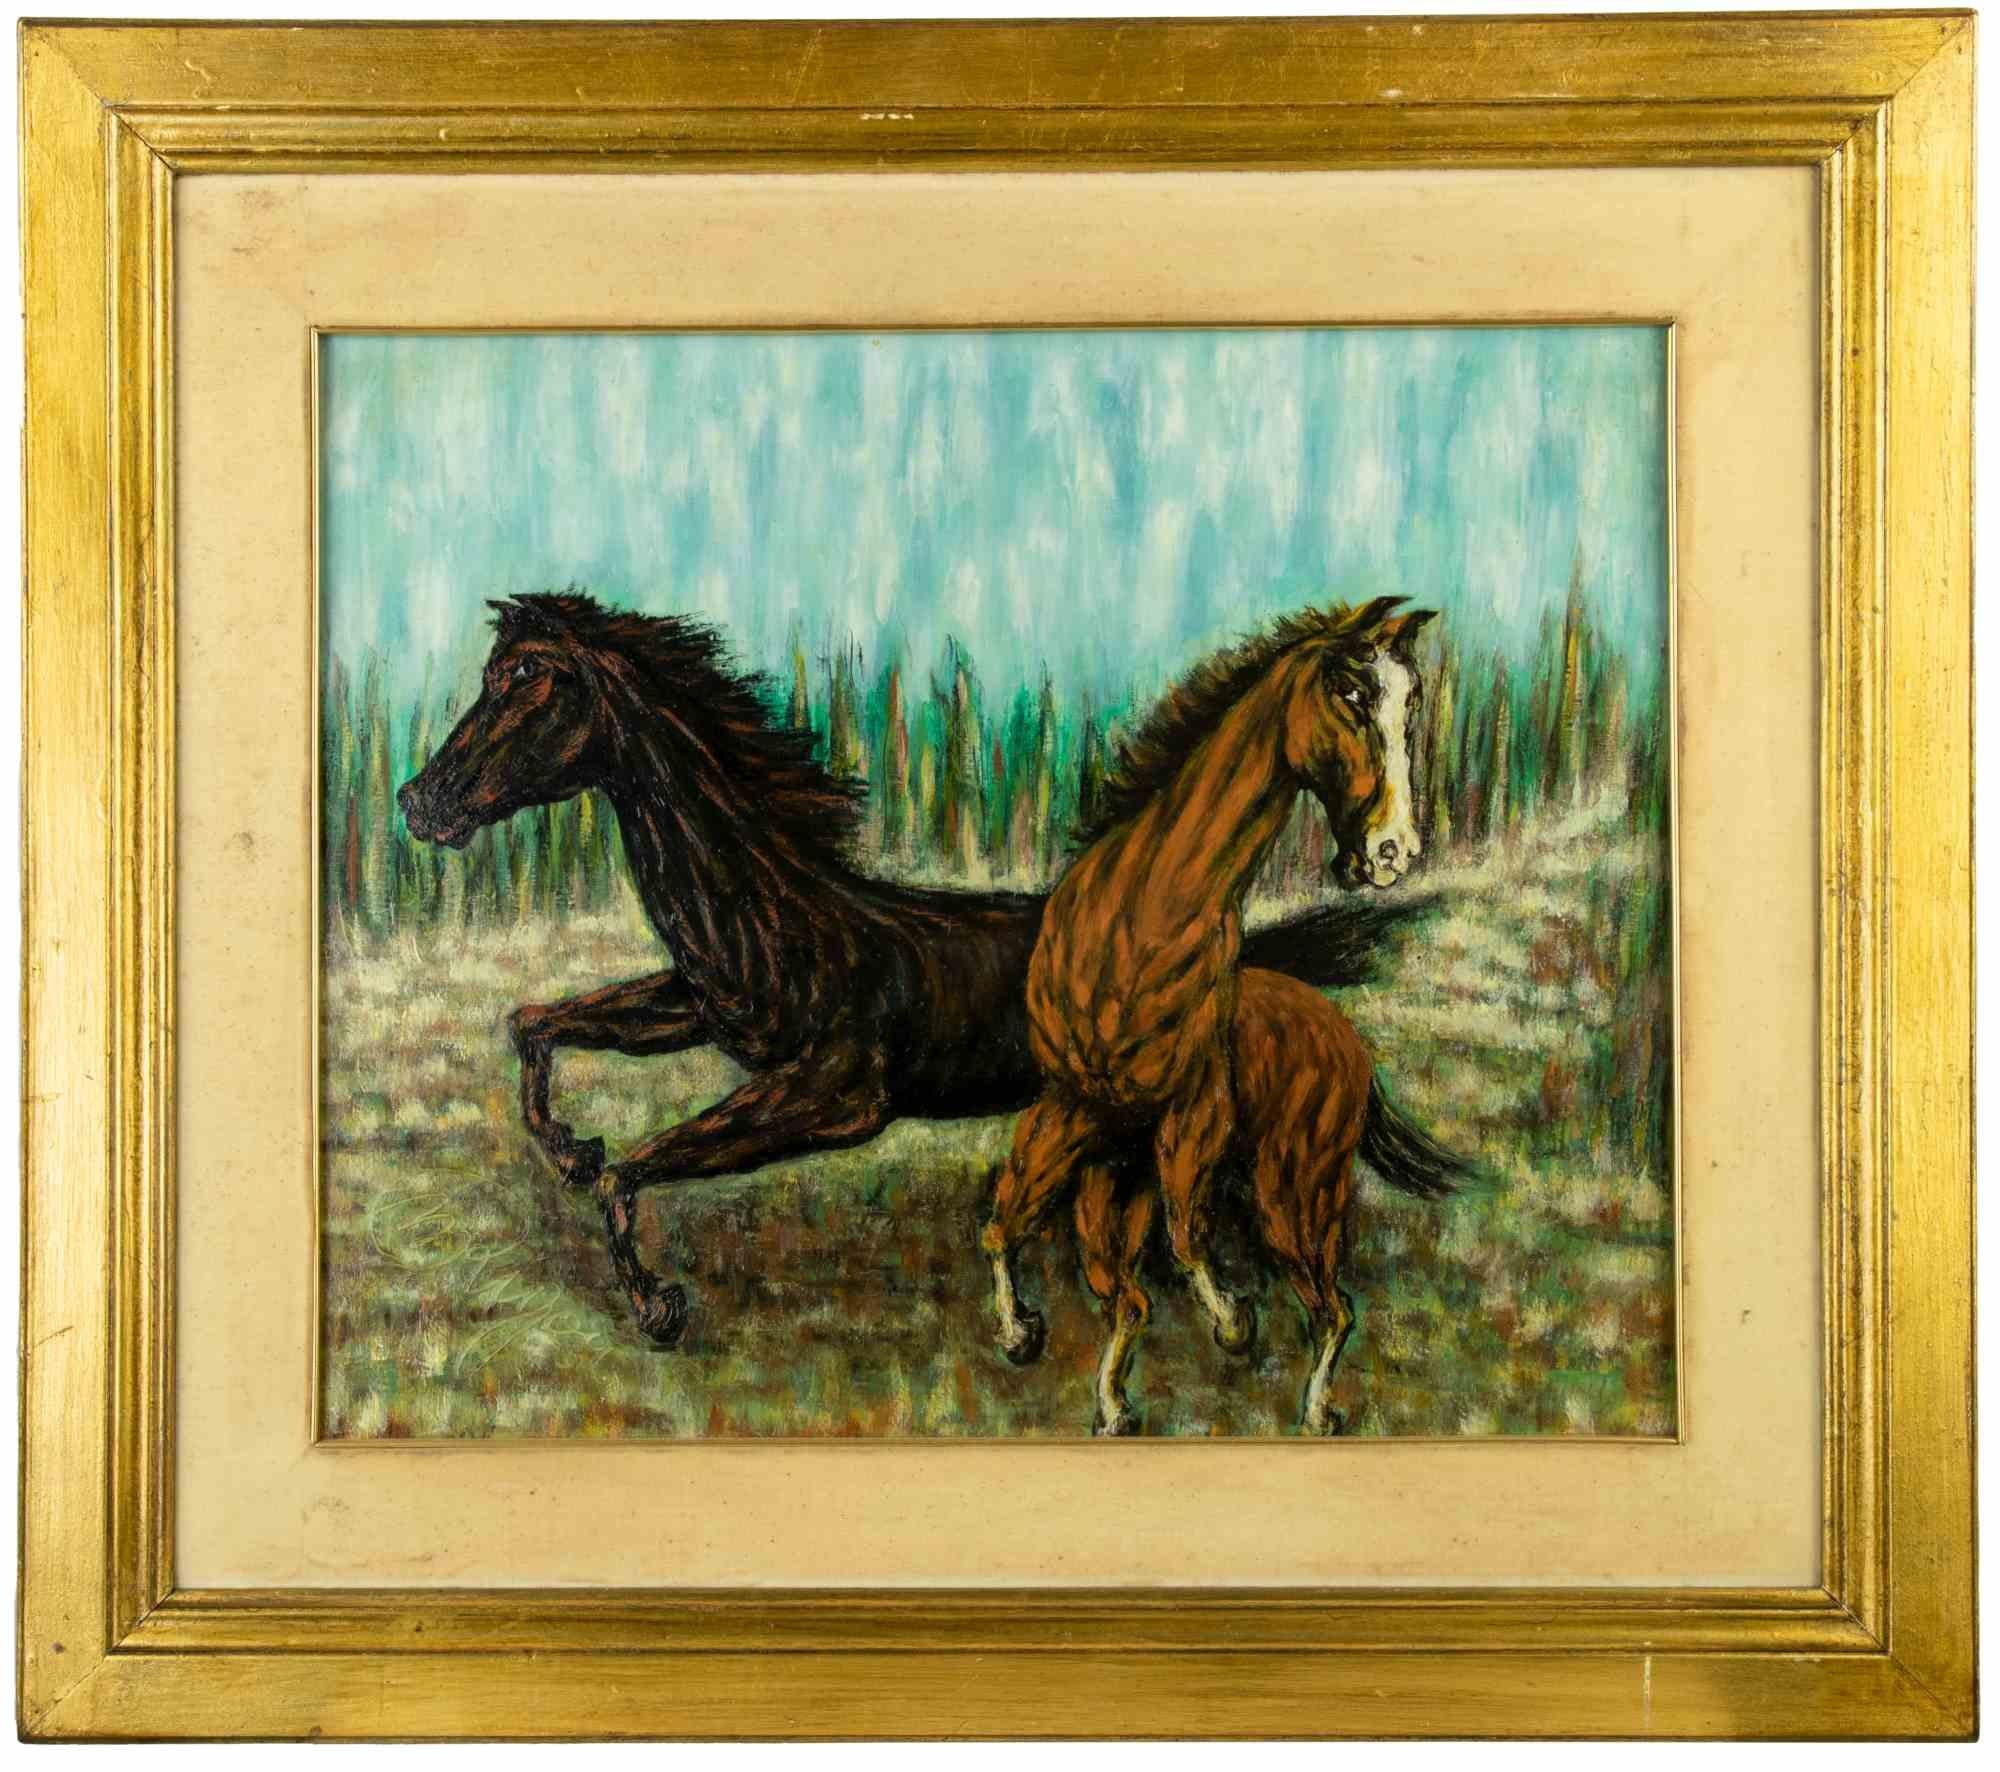 Unknown Figurative Painting - Horses - Oil on Canvas - 1991